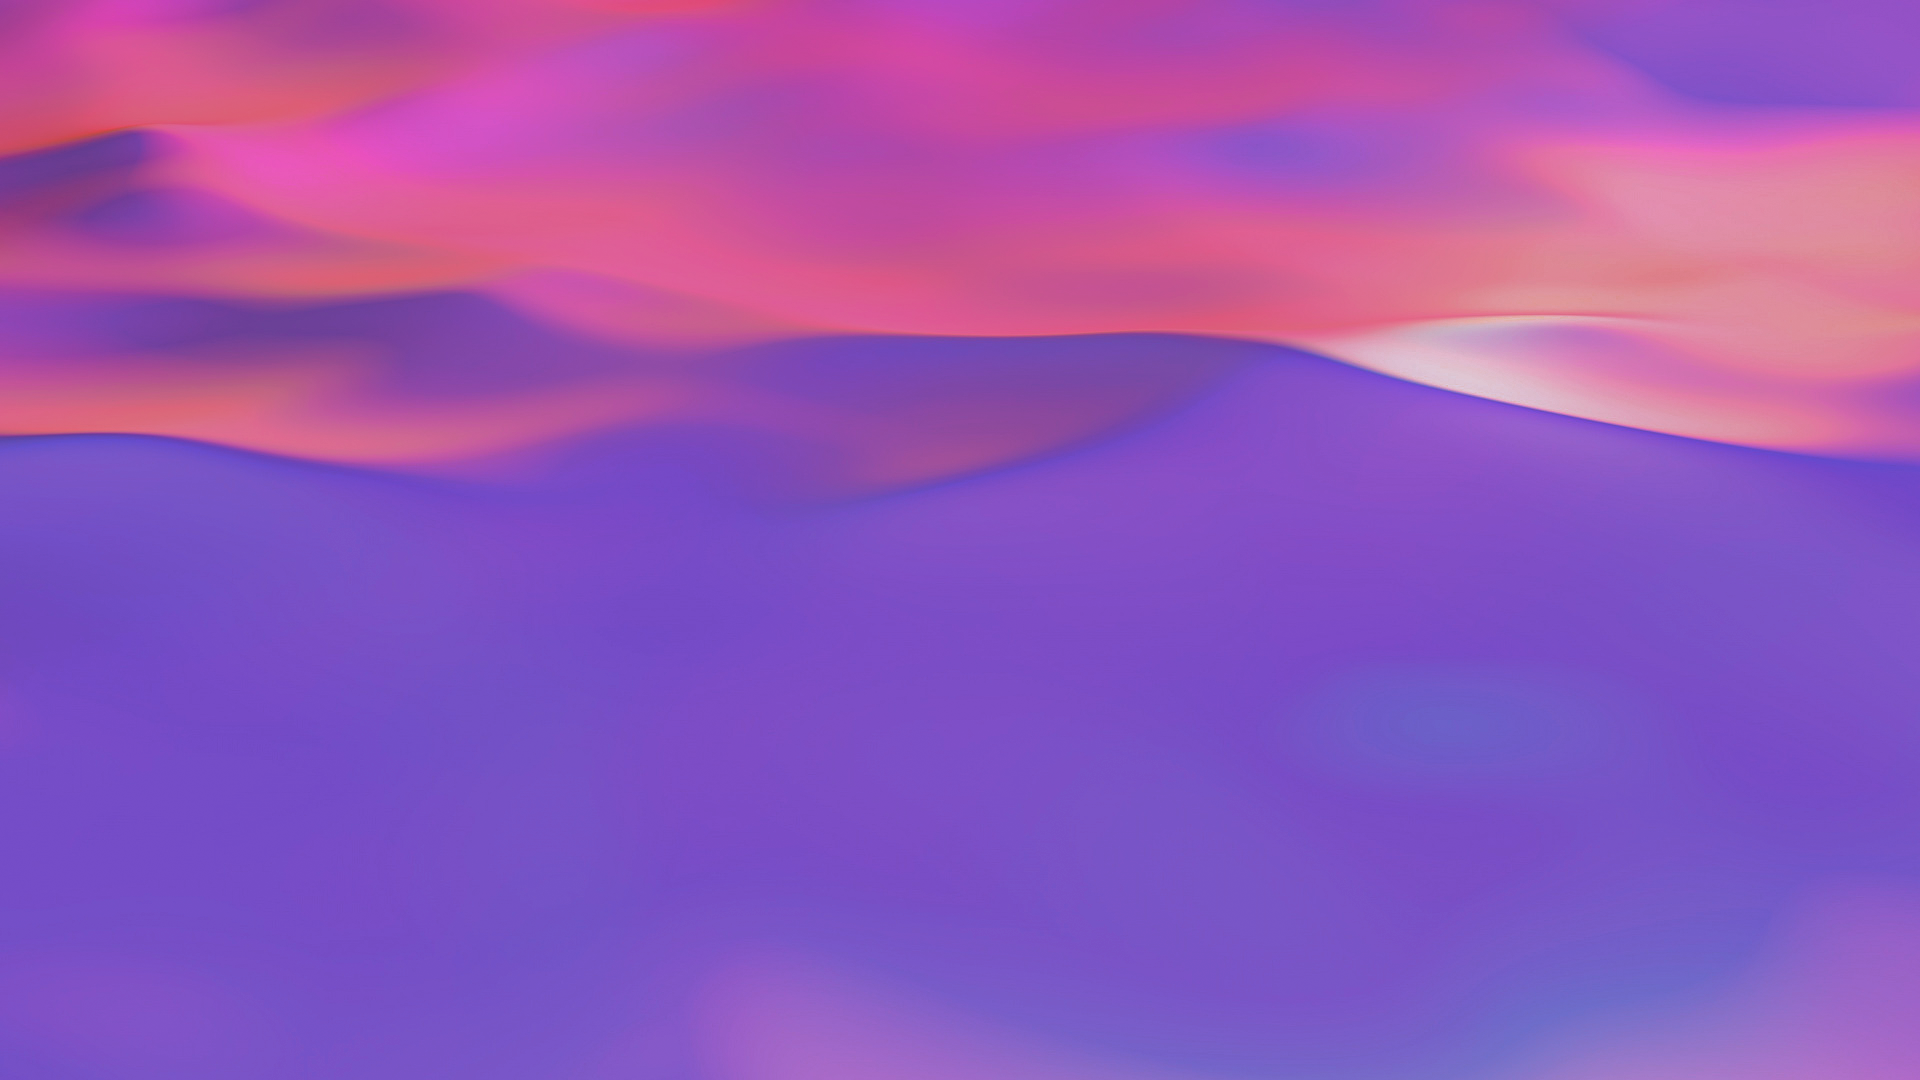 Waves Abstract Gradient 1920x1080